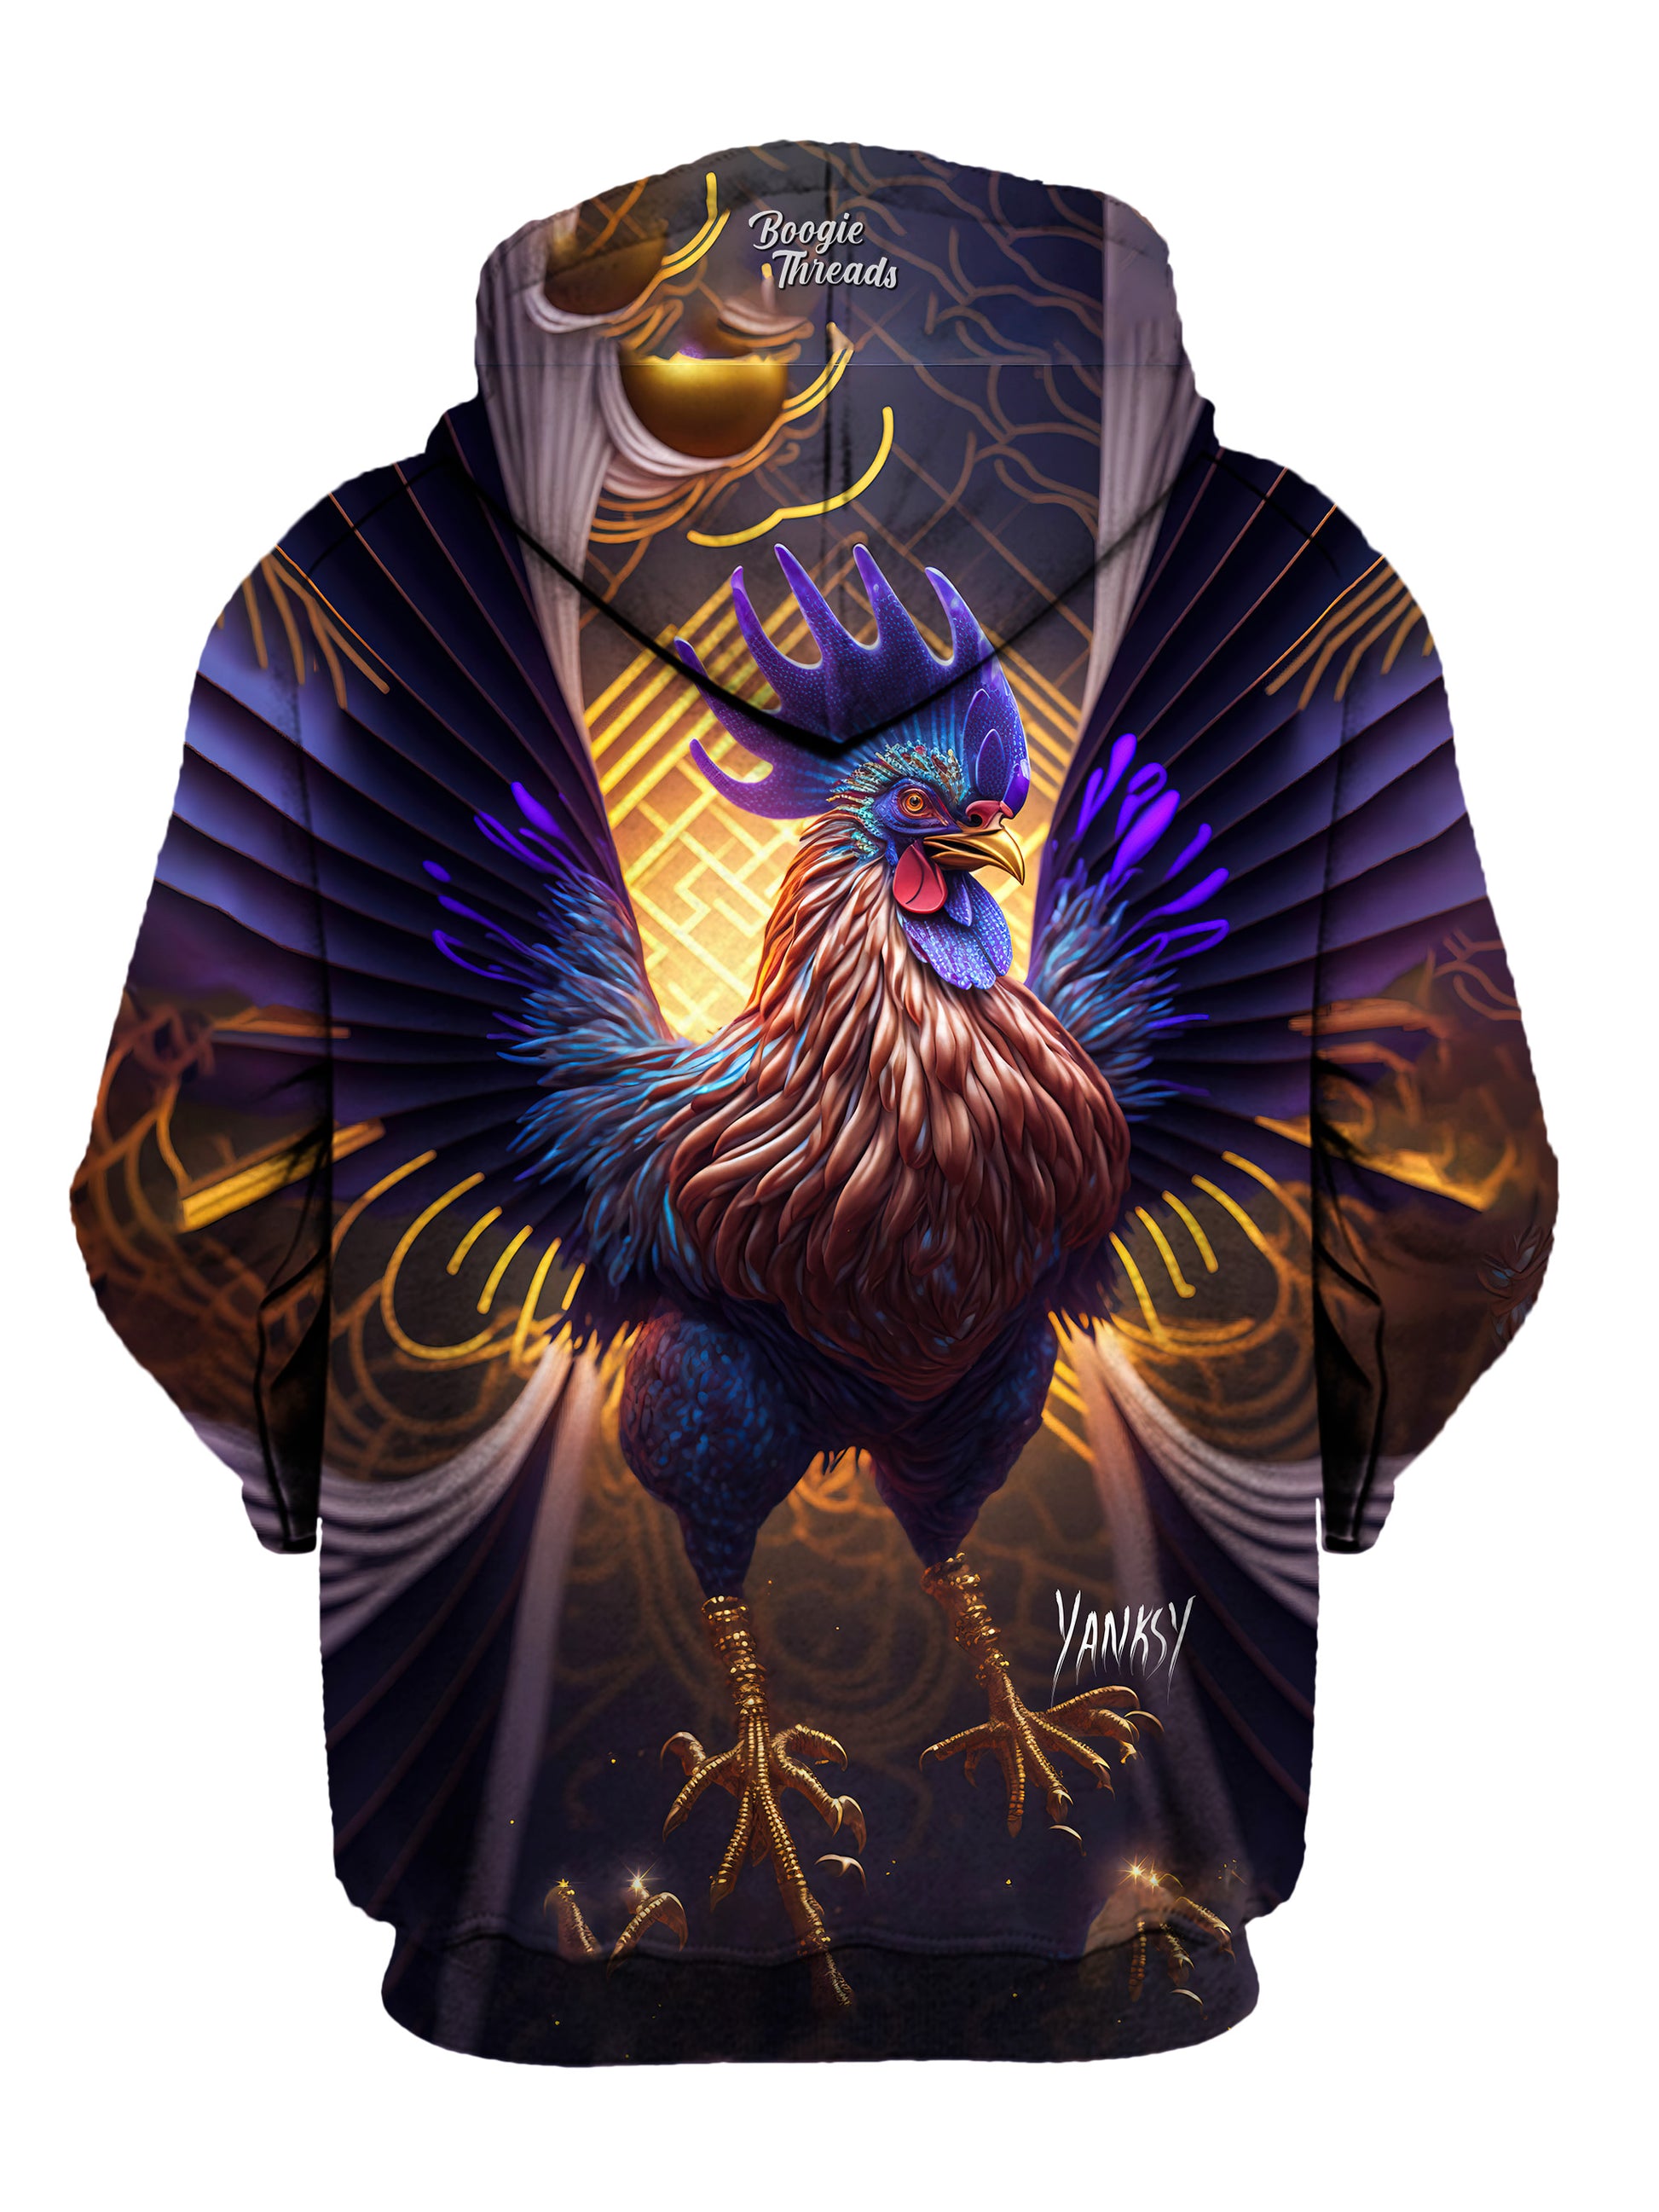 Elevate your wardrobe with this bold and colorful trippy hoodie